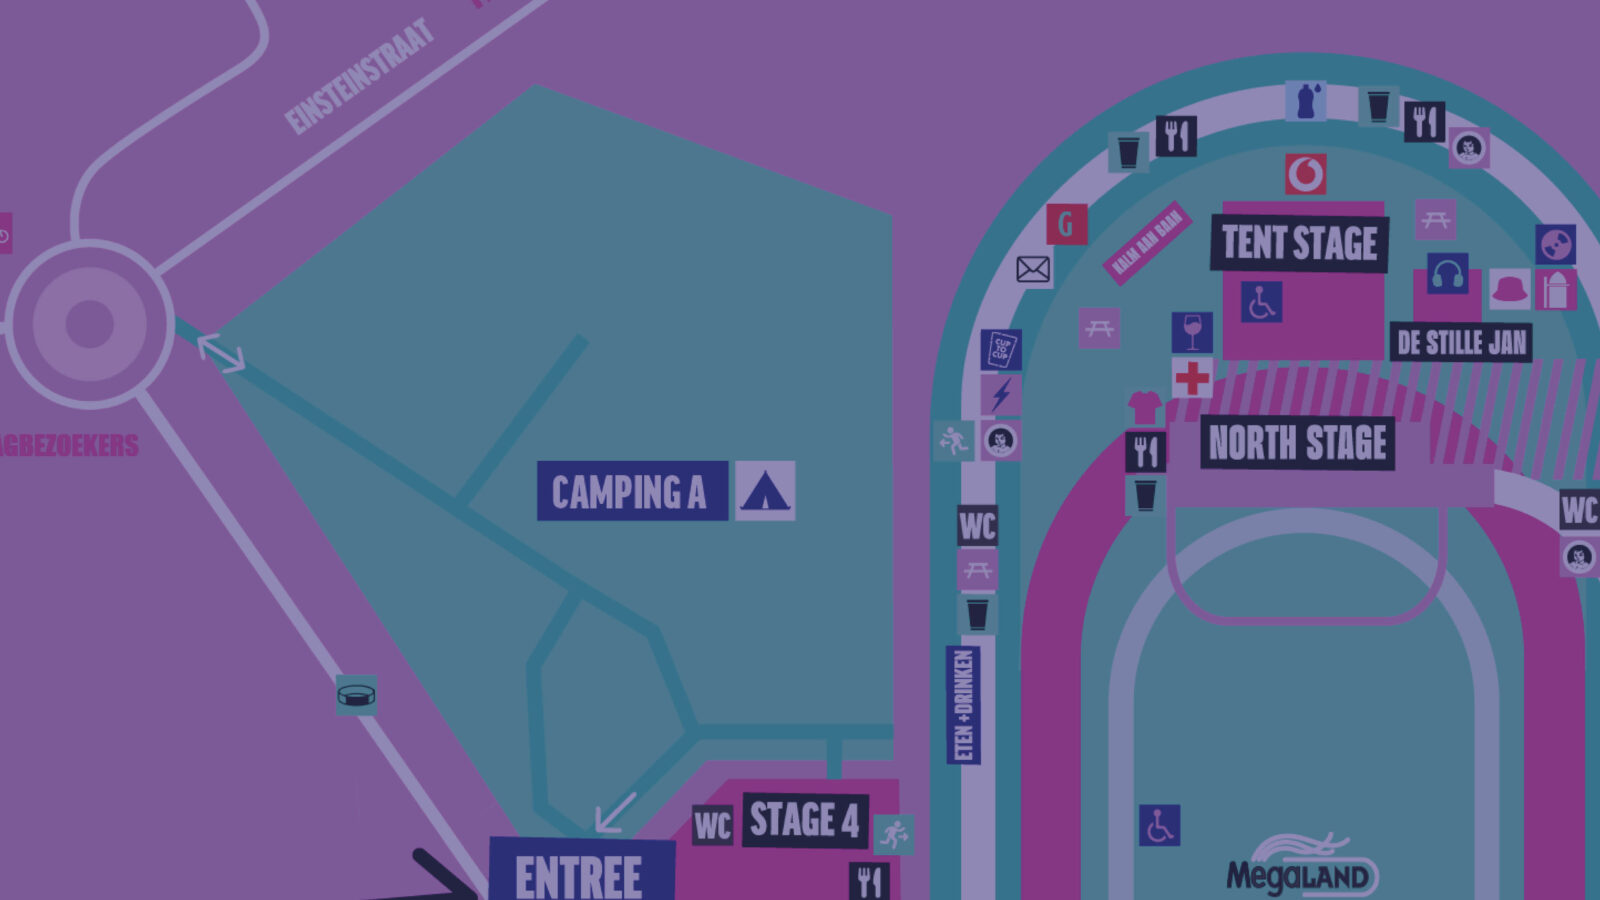 Festival maps, food and drinks!